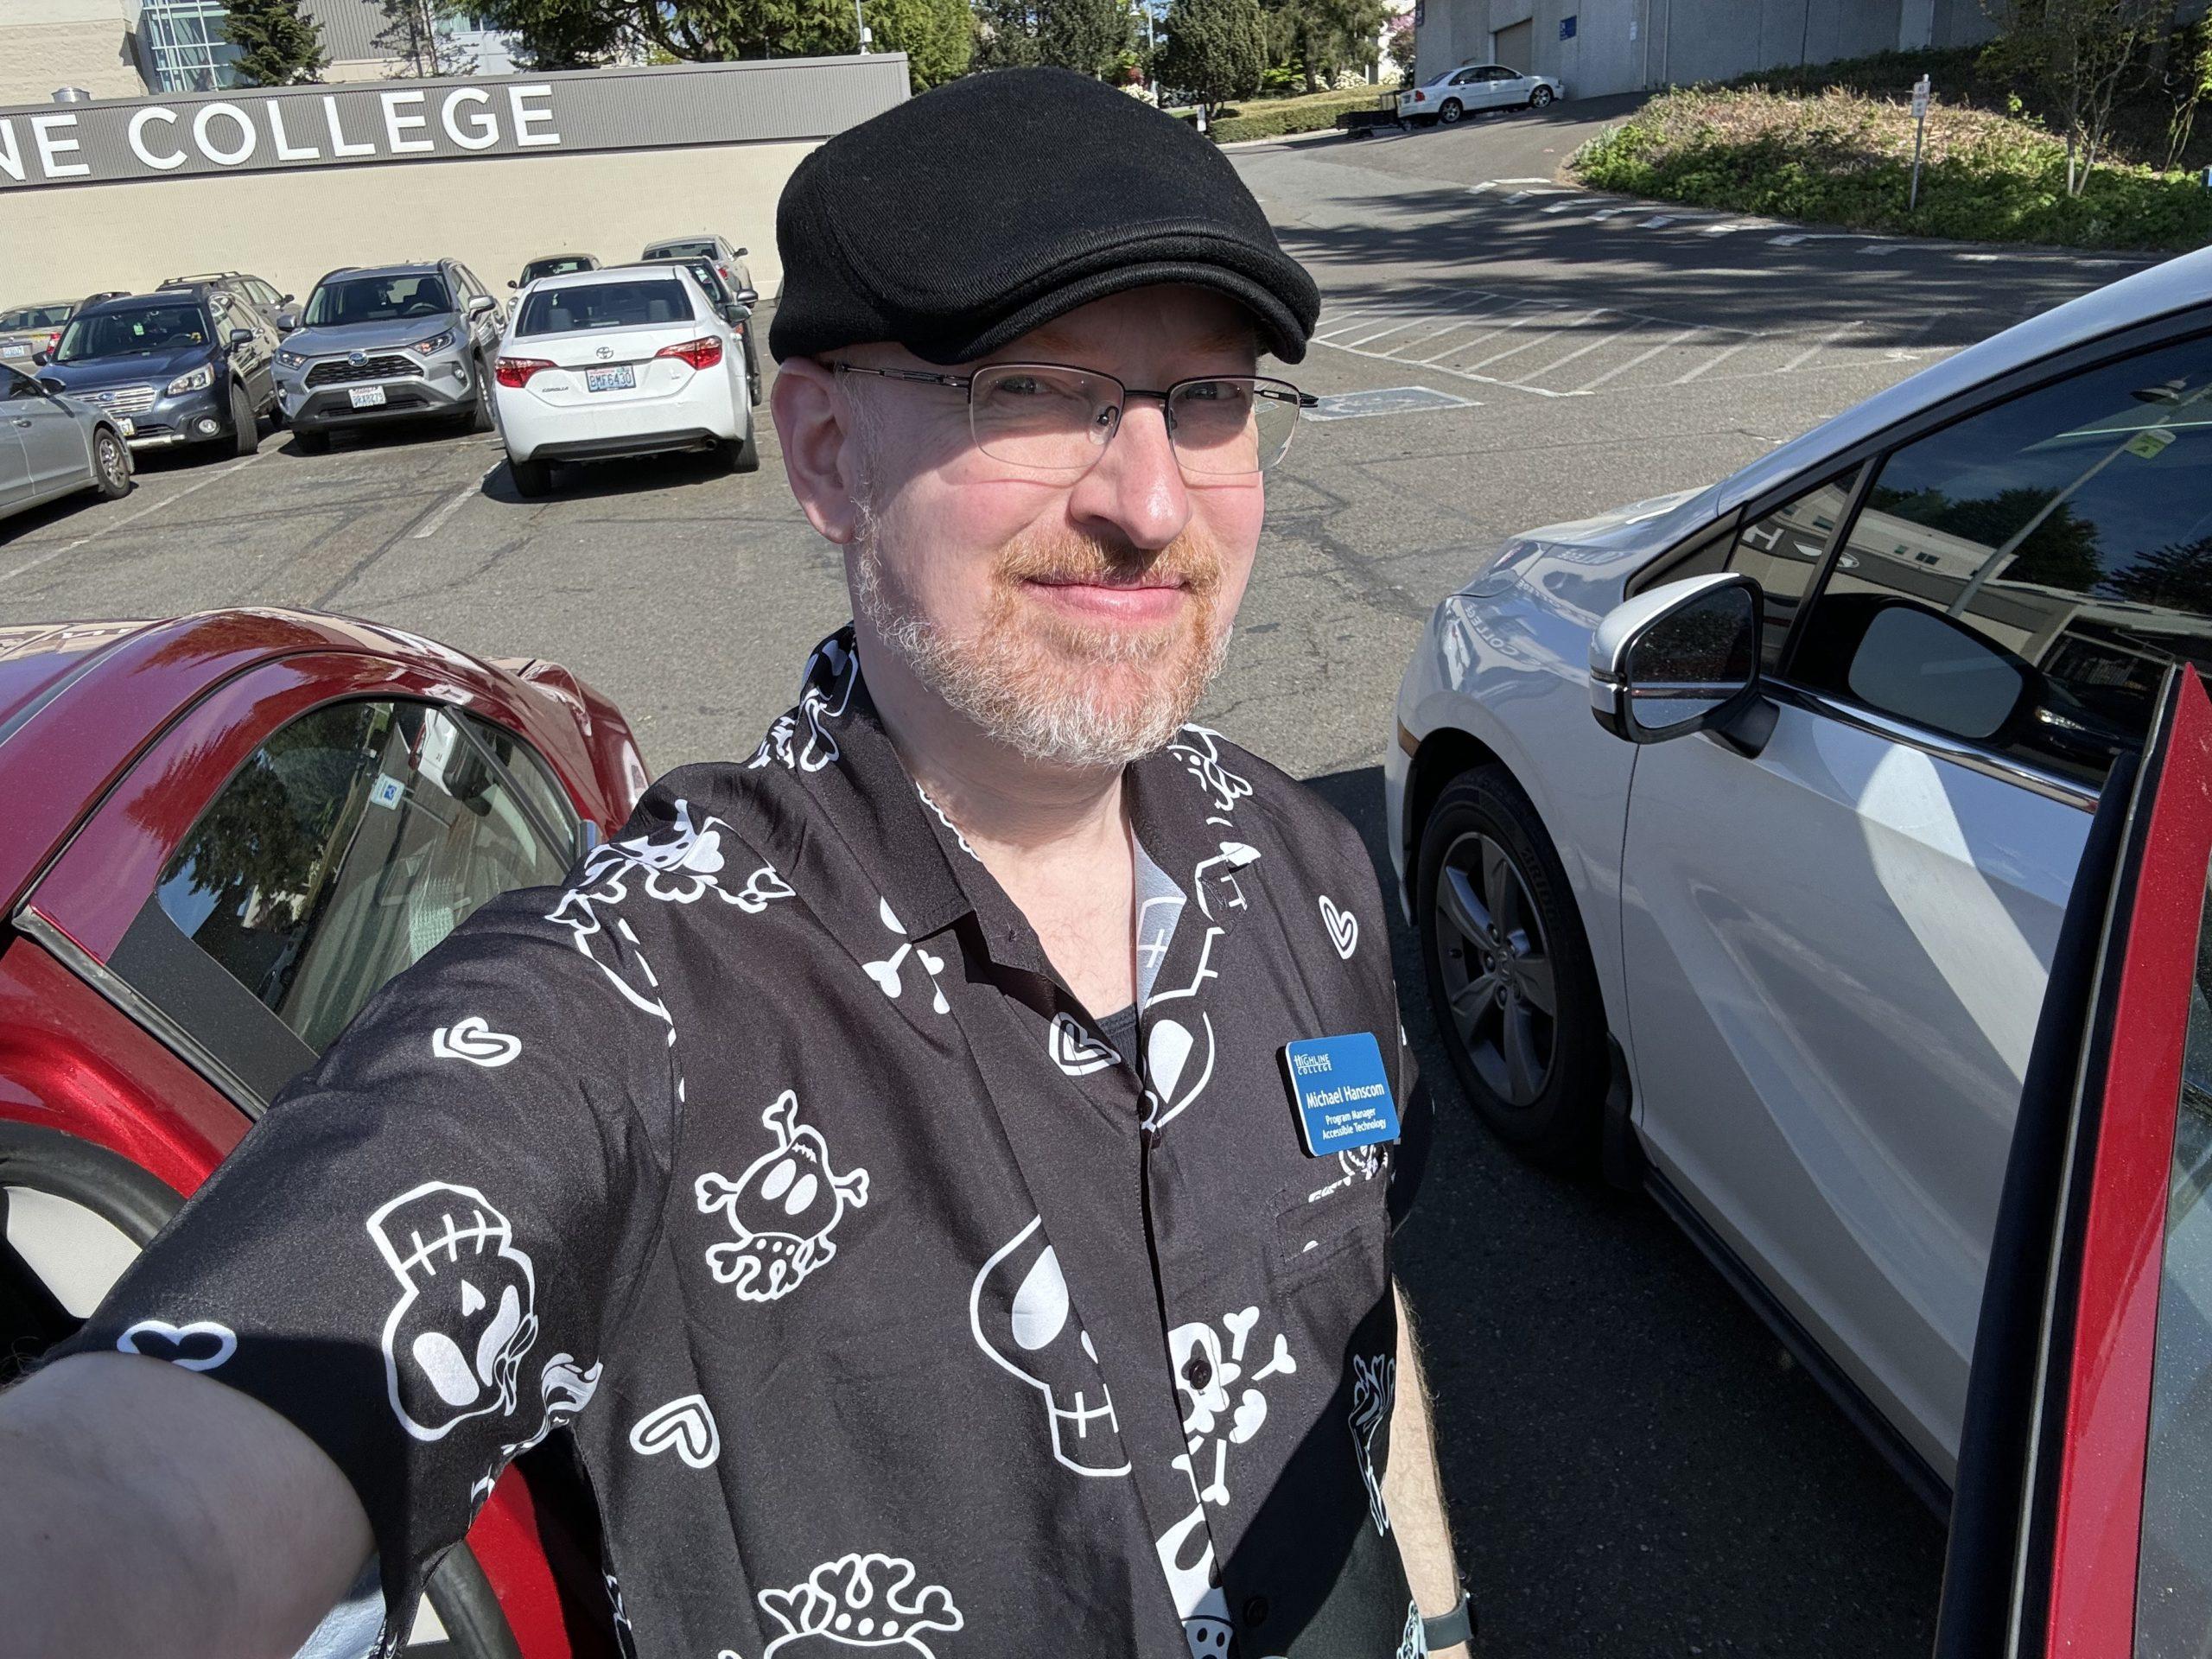 Me in the college parking lot by my car, standing in the sun, wearing a shirt with very cute cartoon skulls.